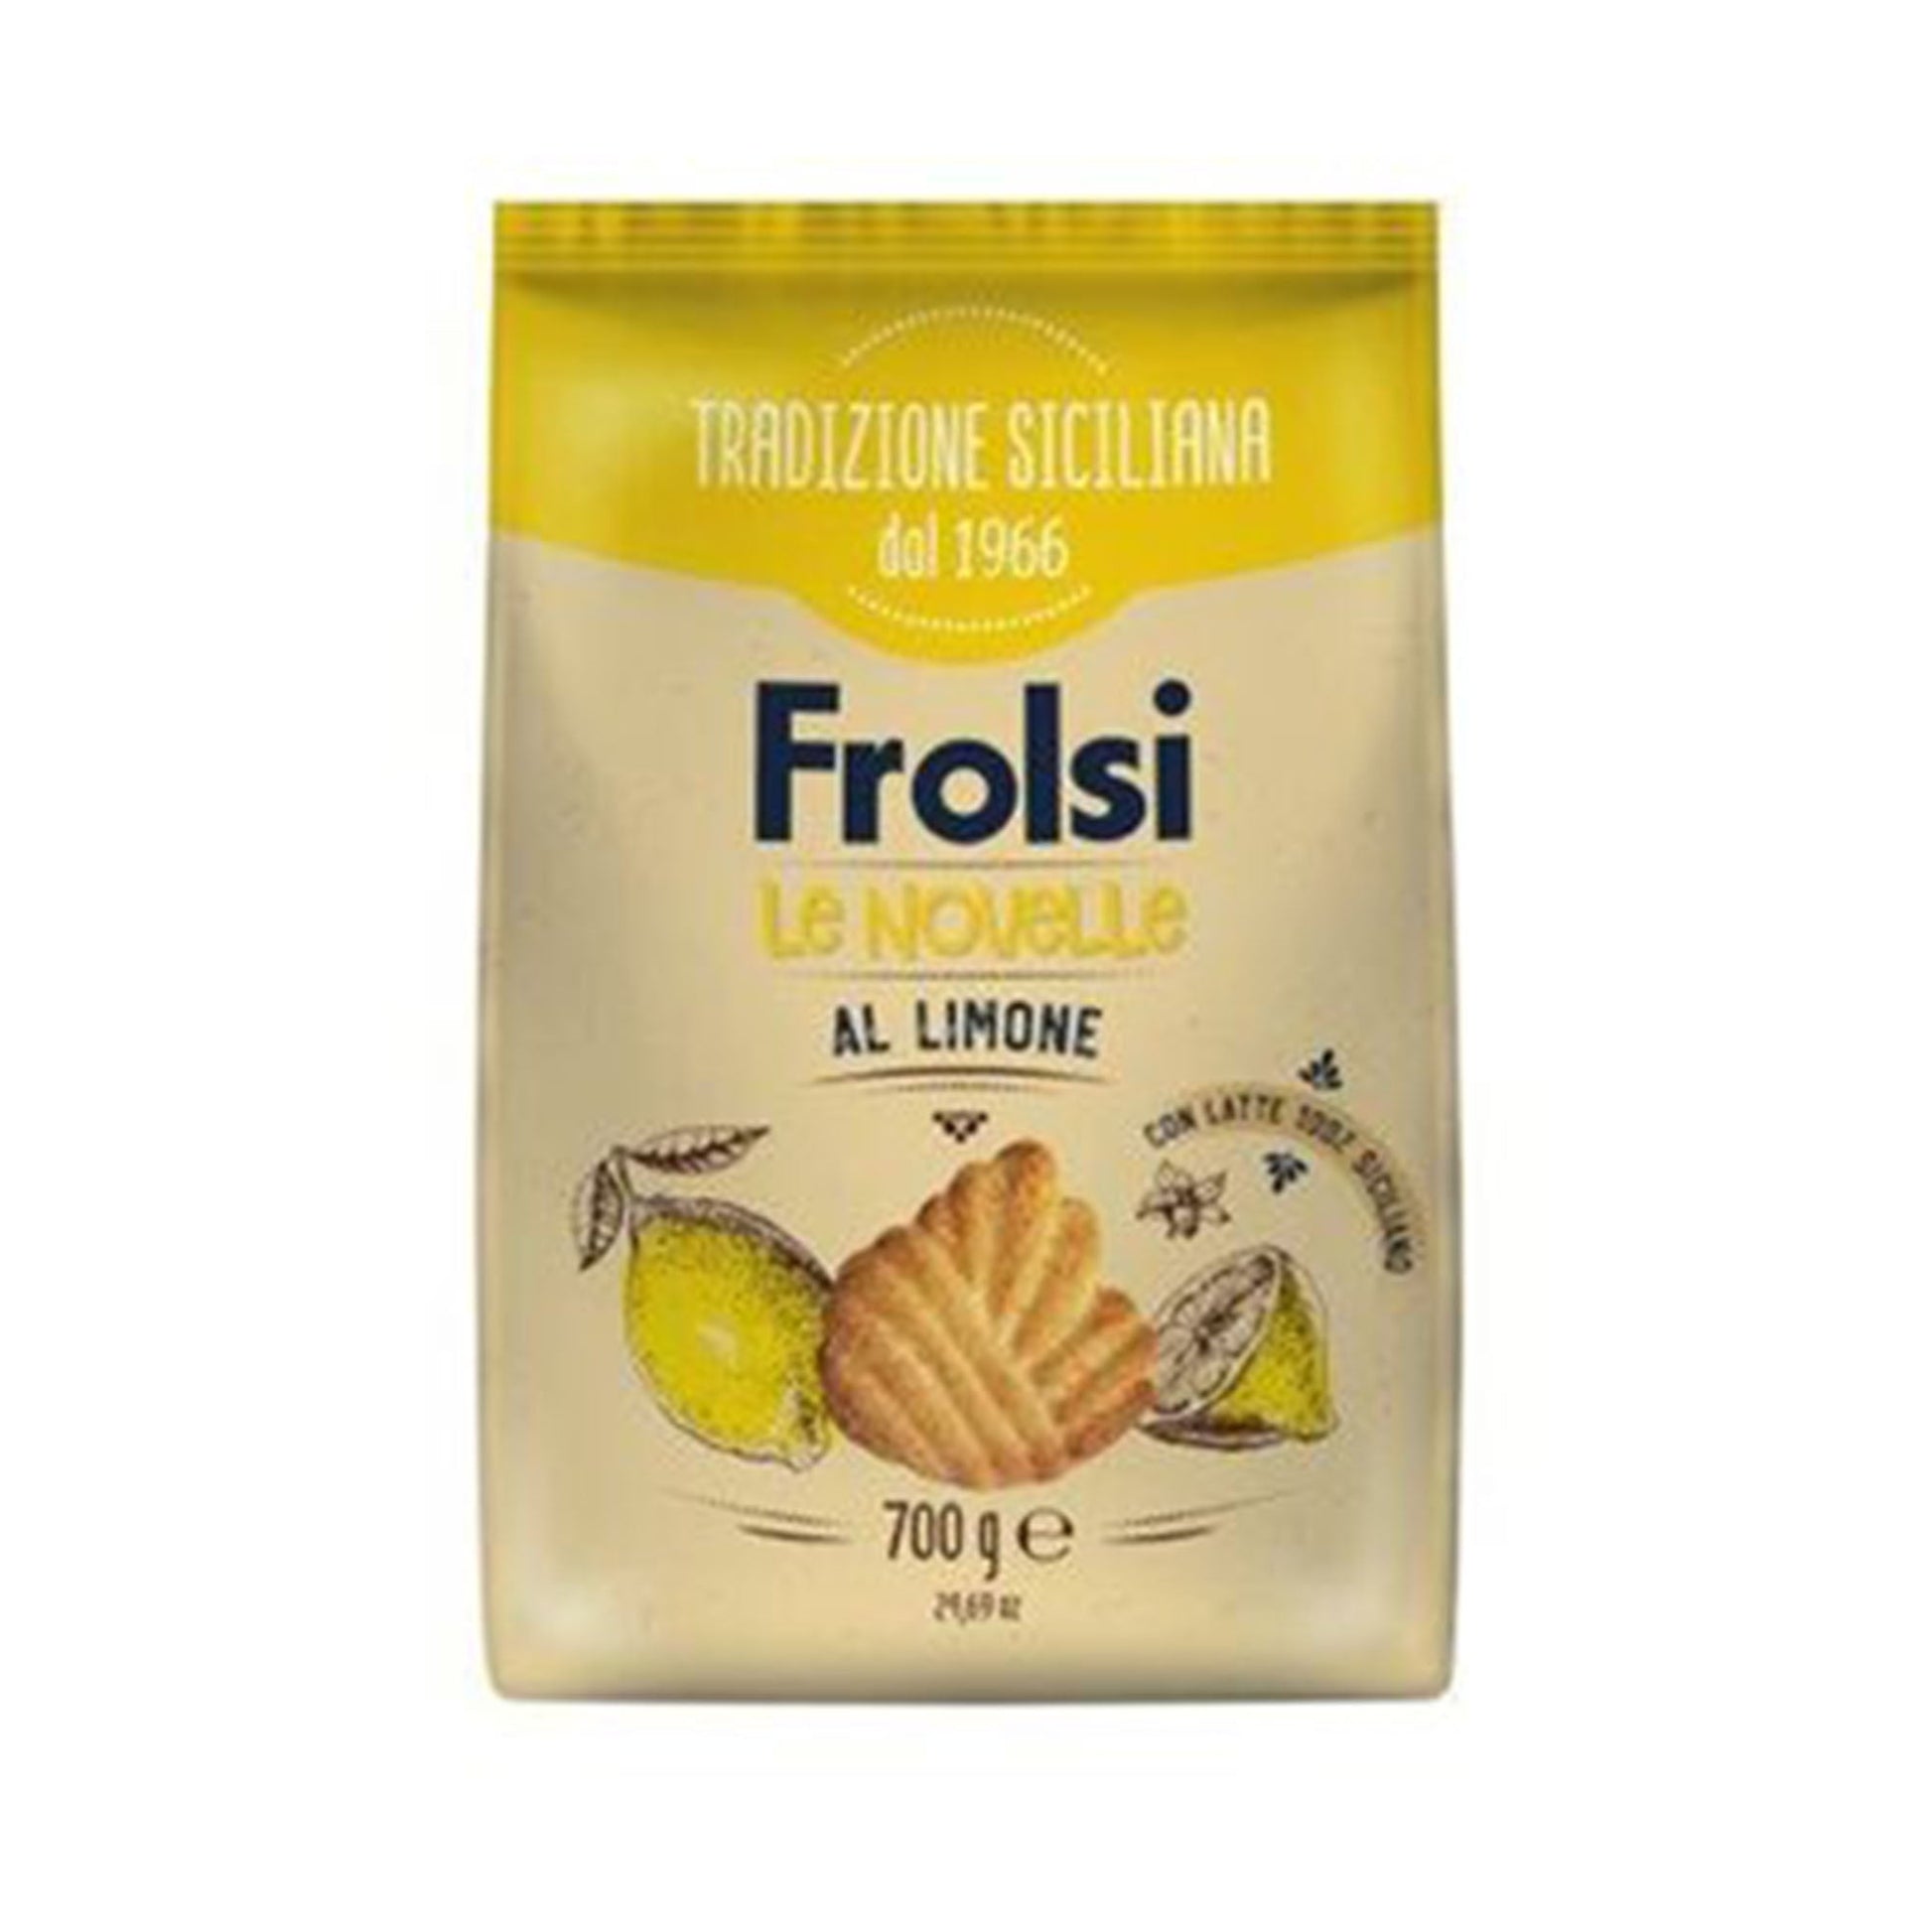 Frolsi Limone Cookies 700G